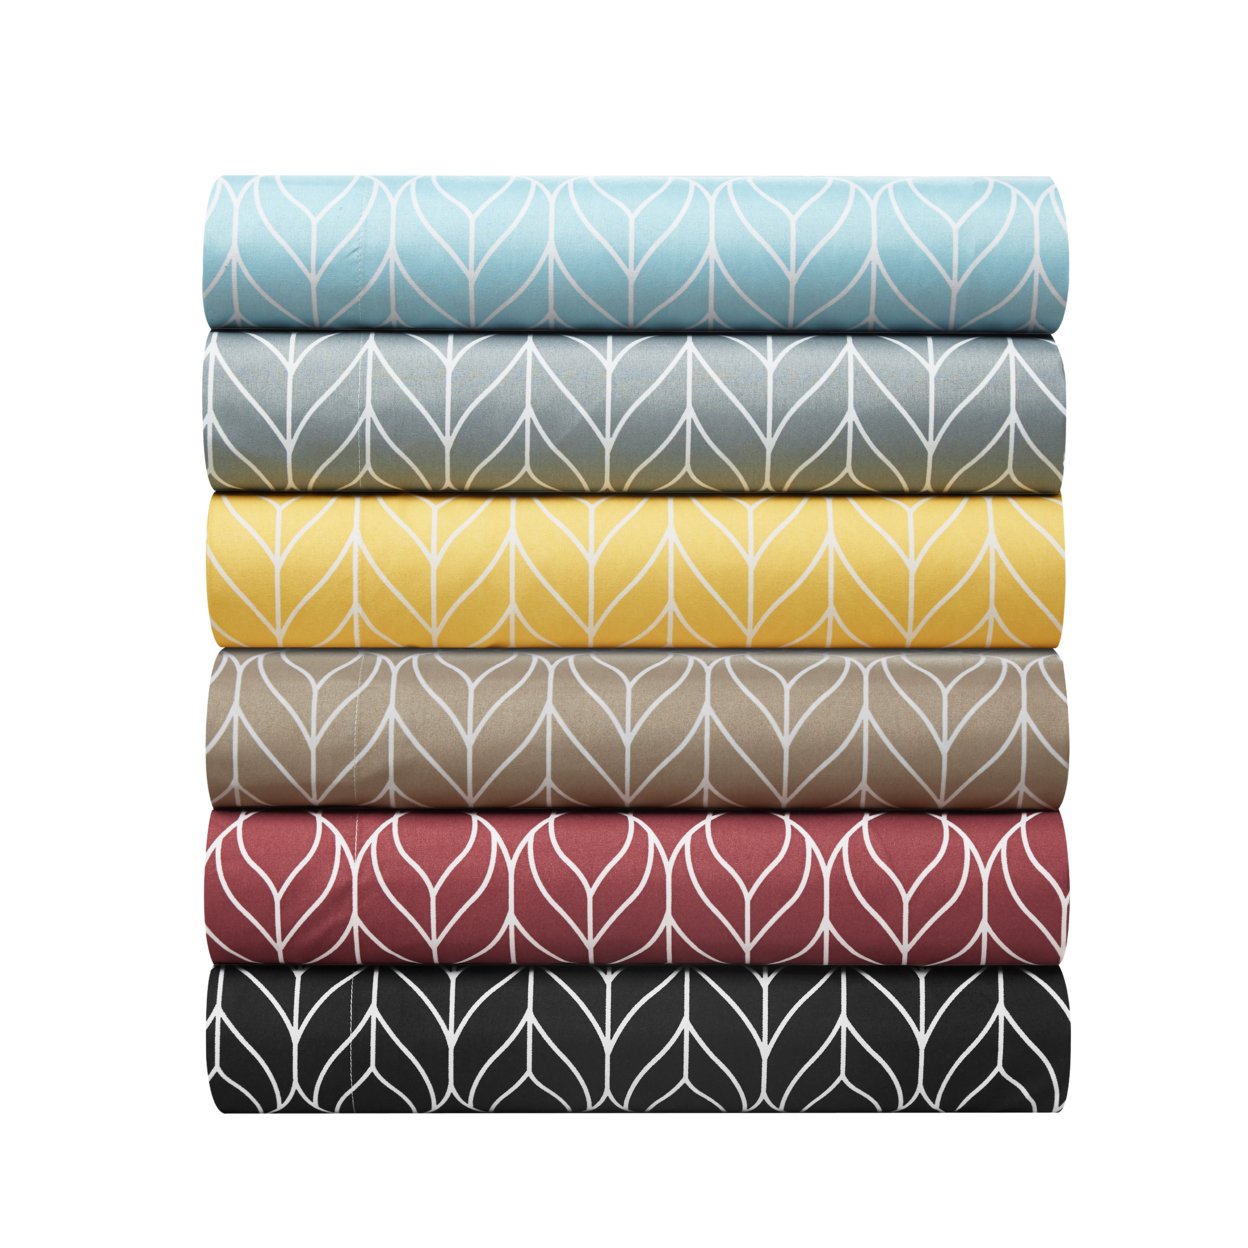 Beech 6 Or 4 Piece Sheet Set Super Soft Two-Tone Geometric Leaf Pattern Print Deep Pocket Design - Taupe, Queen